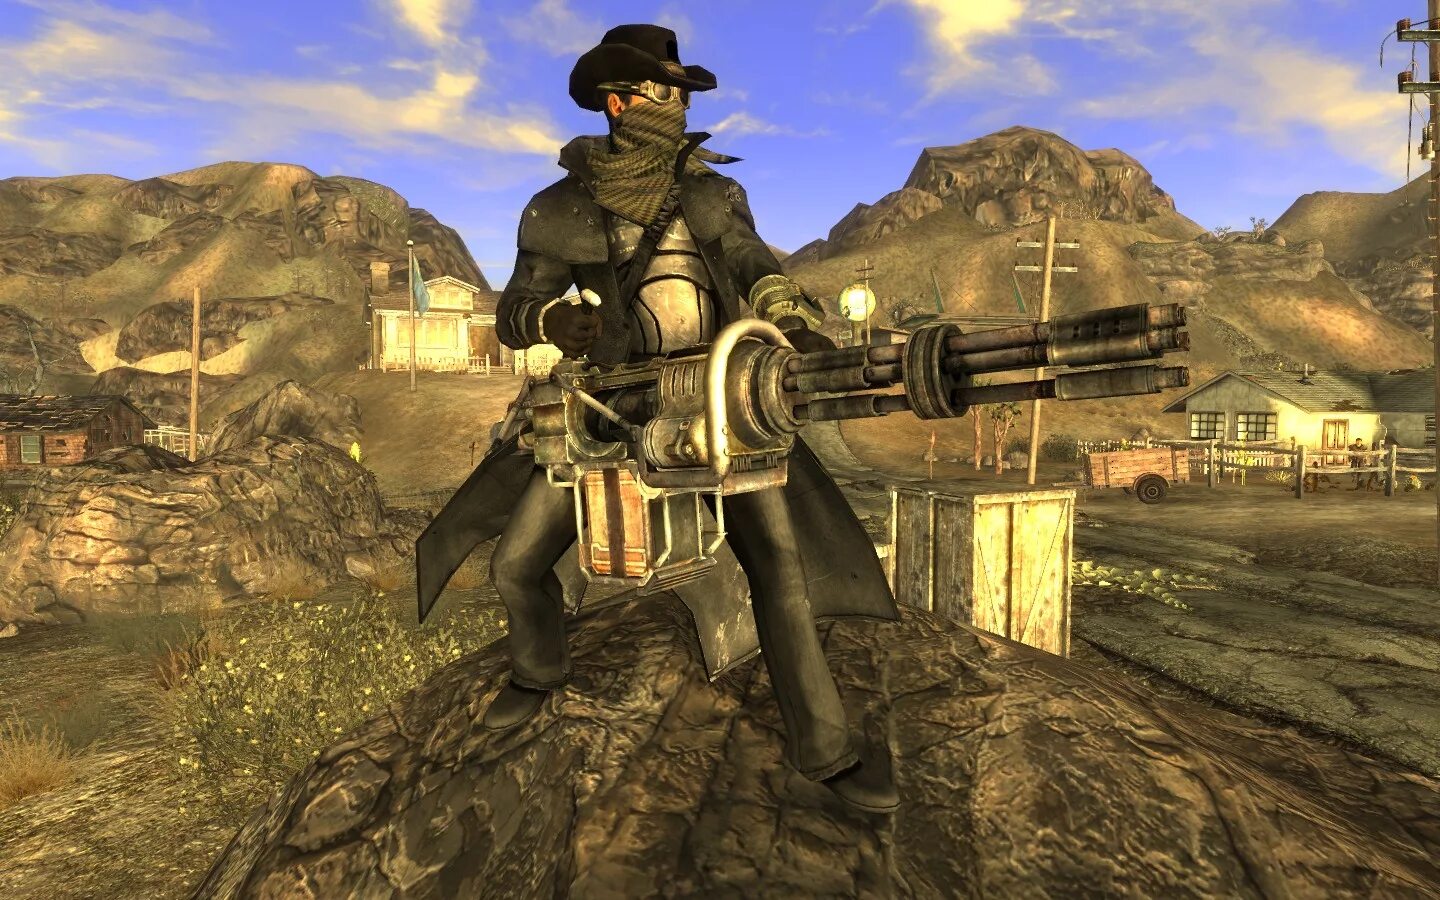 Fallout new vegas звезда. Фоллаут Нью Вегас. Fallout Нью Вегас. Фоллыч Нью Вегас. Fallout New Vegas 2010.